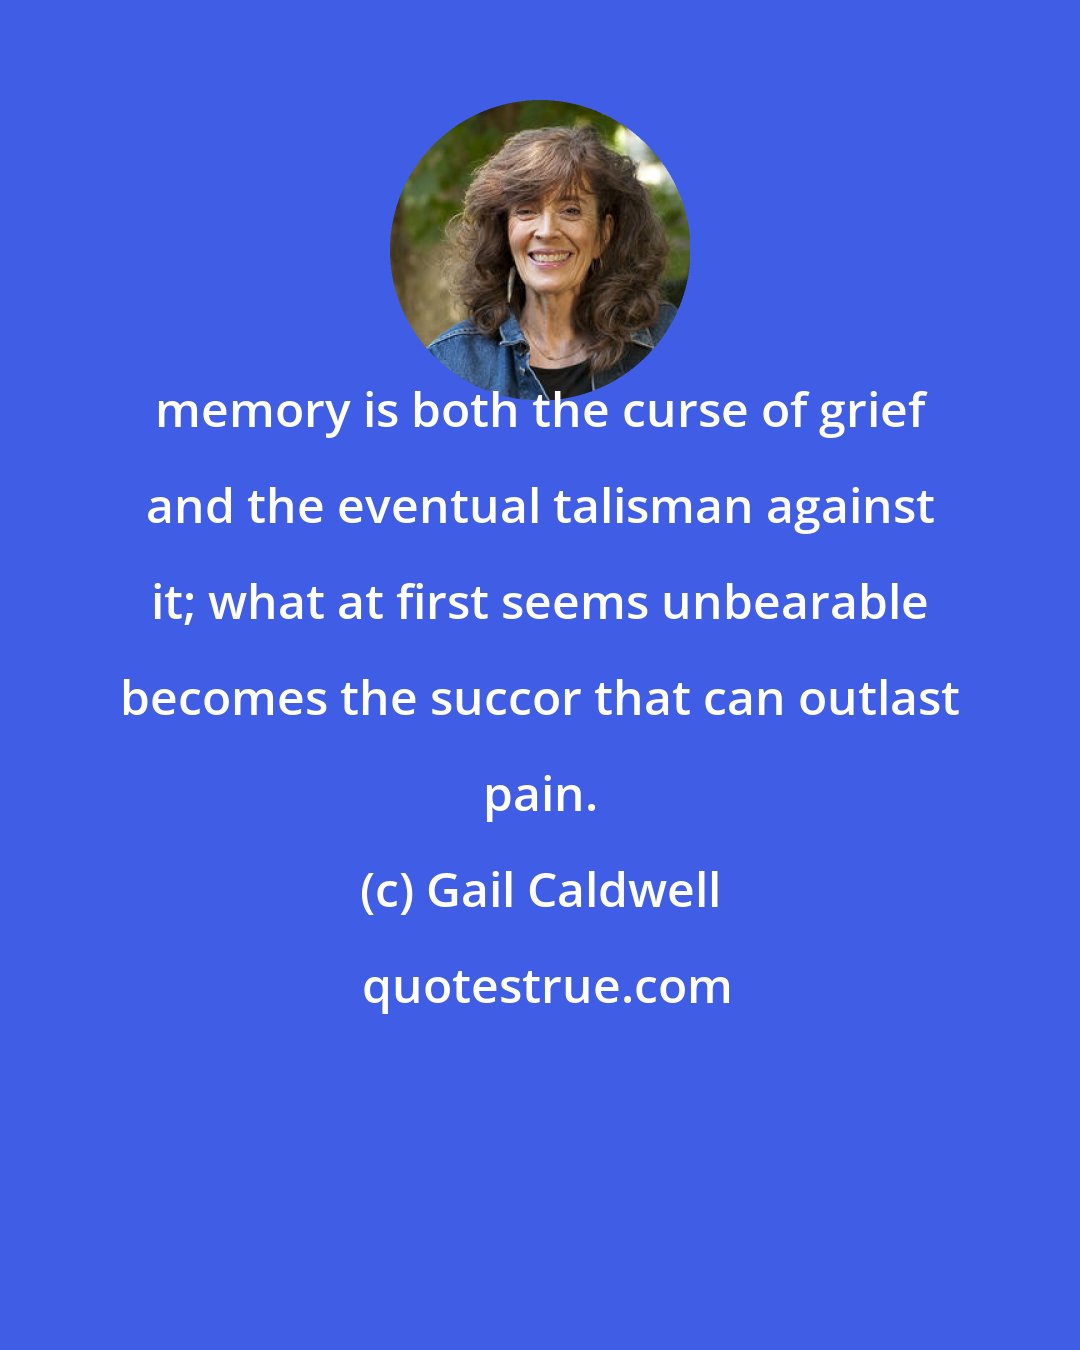 Gail Caldwell: memory is both the curse of grief and the eventual talisman against it; what at first seems unbearable becomes the succor that can outlast pain.